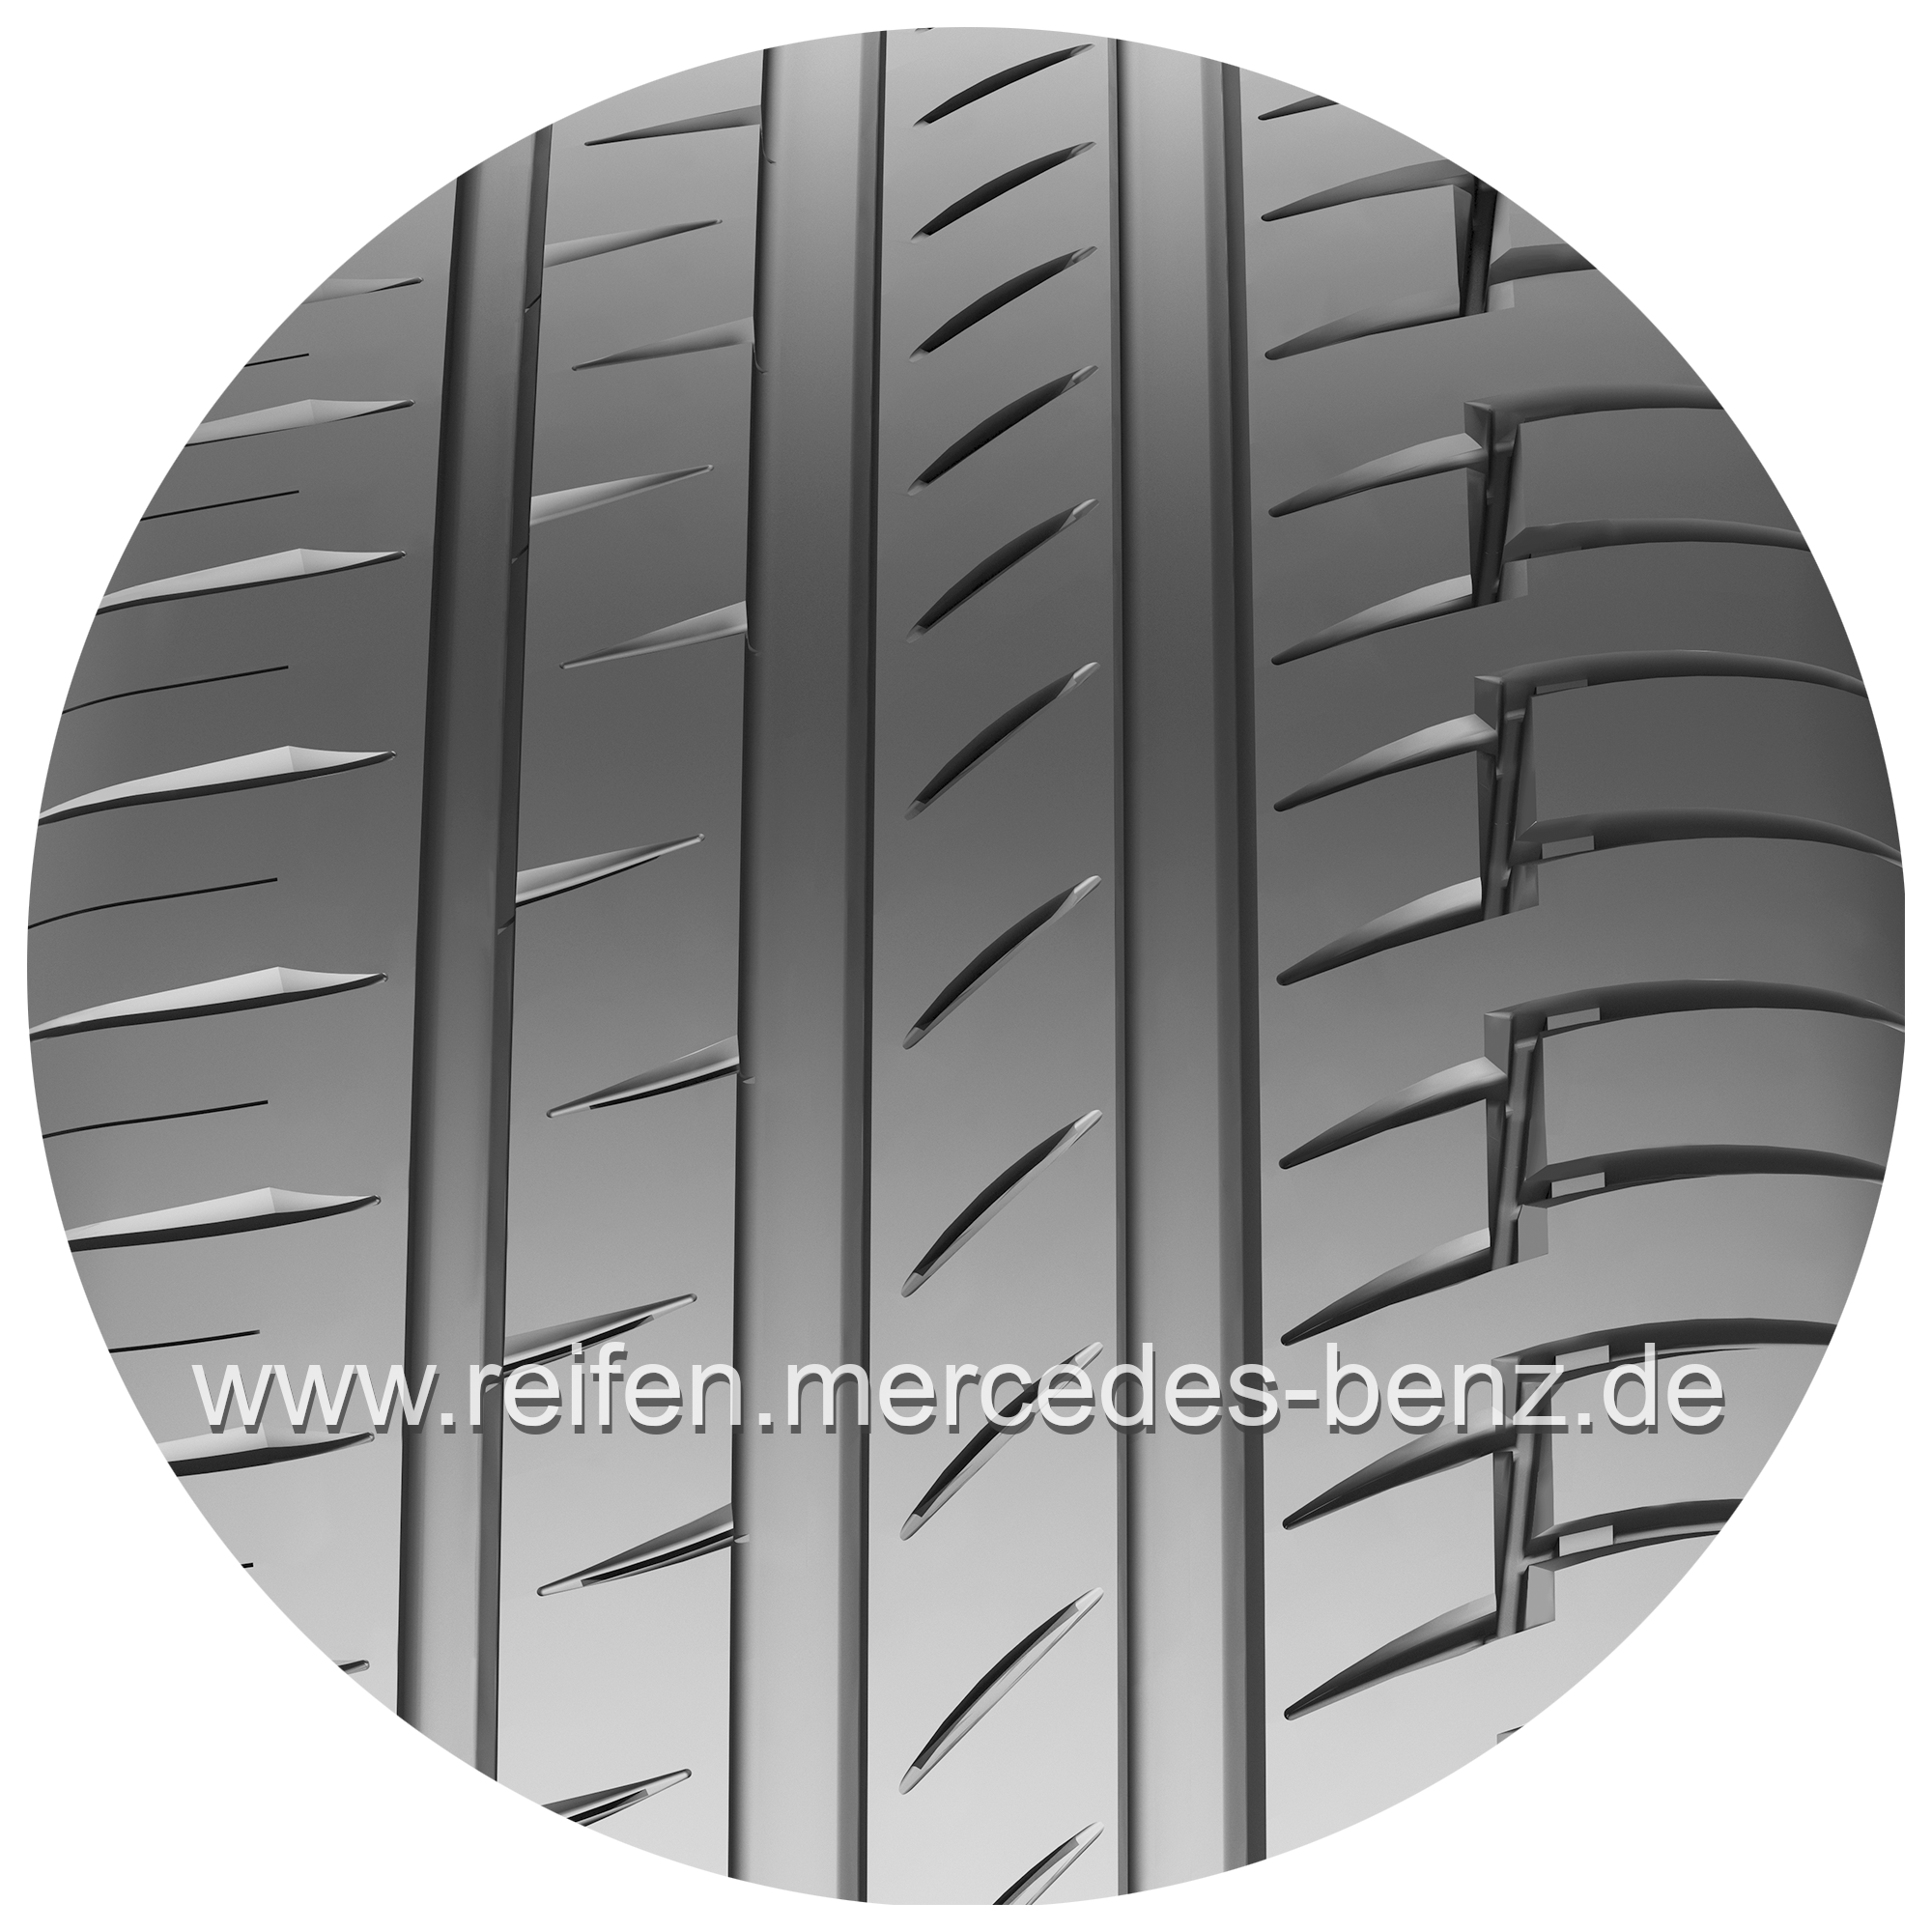 Continental PremiumContact 6 MO, Continental, PremiumContact 6 MO, 275/55 R19 111W, Sommer, Q44002111114A